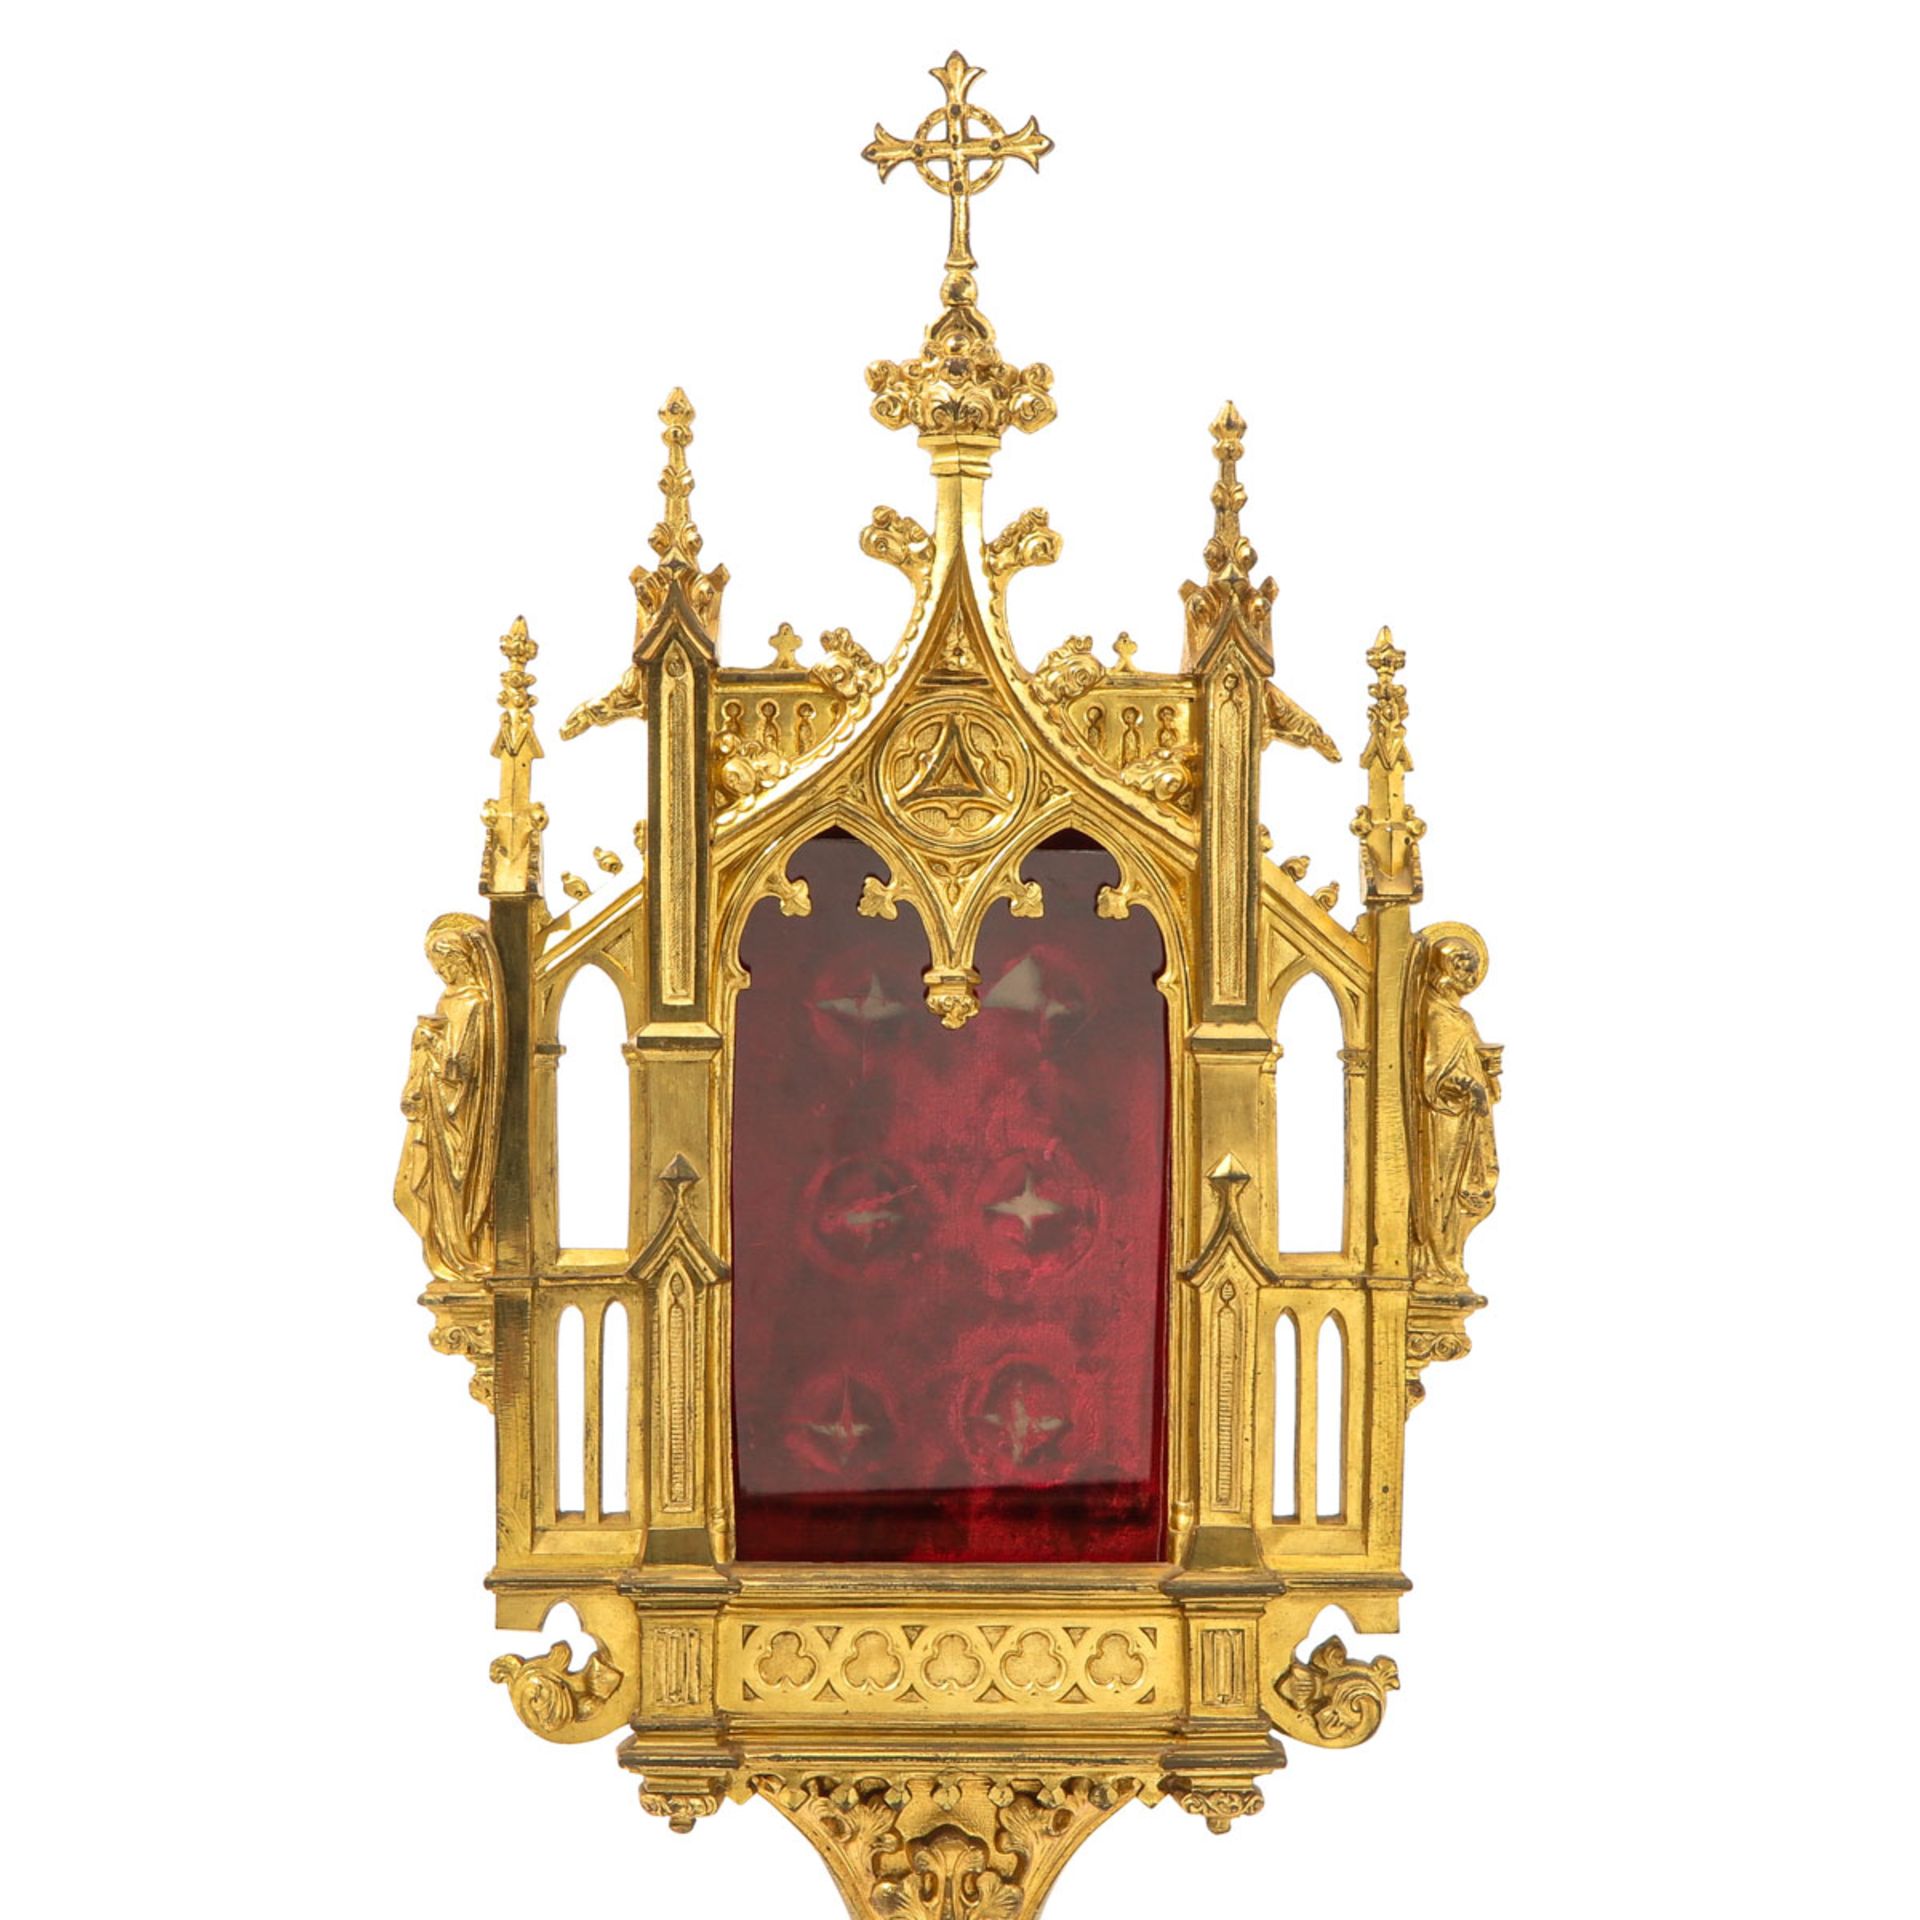 A Pair of Neo Gothic Gilded Reliquaries - Image 9 of 10